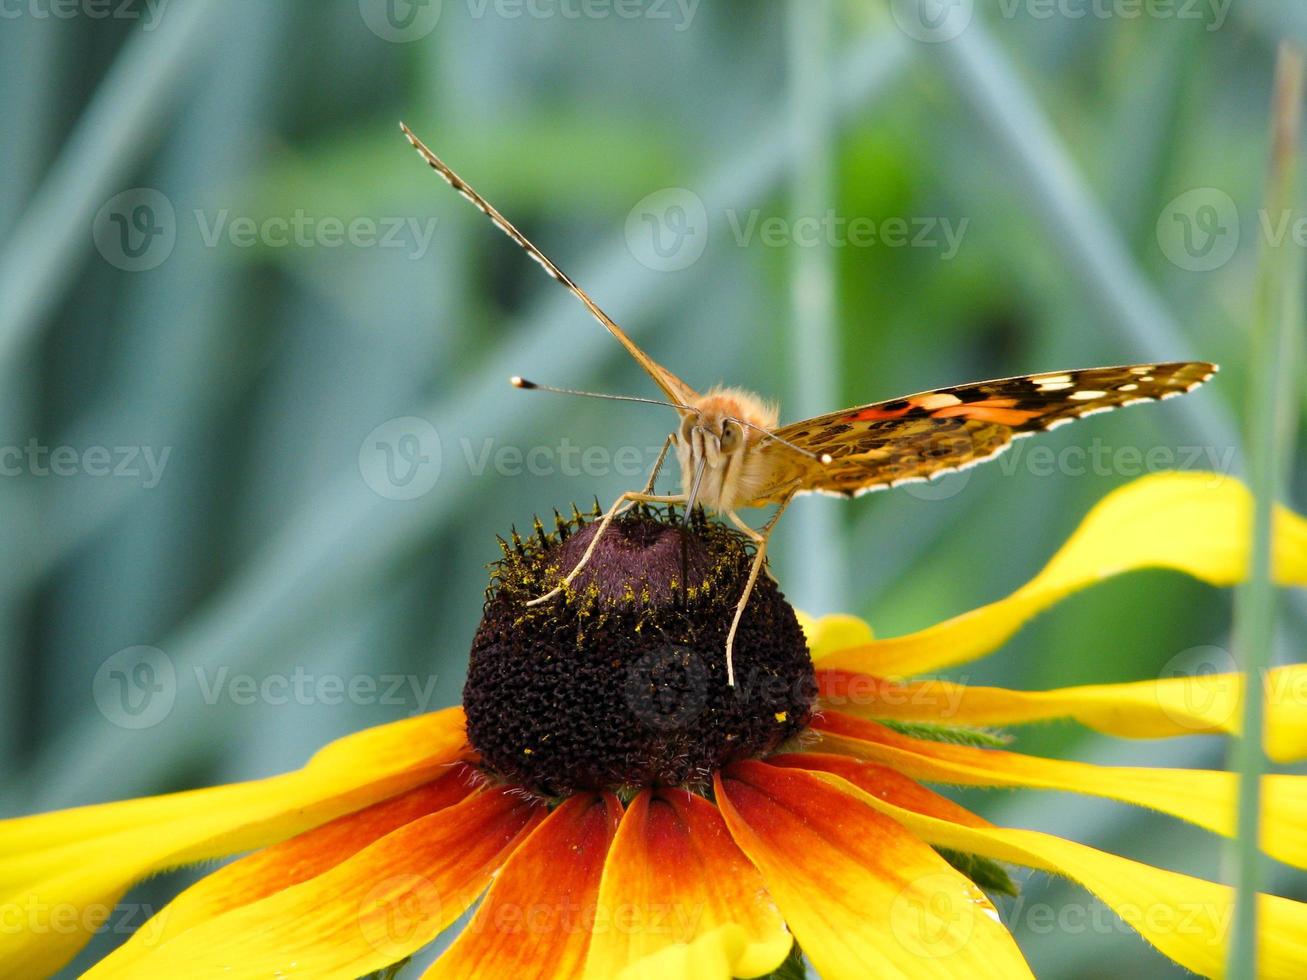 Butterfly Vanessa cardui sits on a flower Rudbeckia and drinks nectar photo